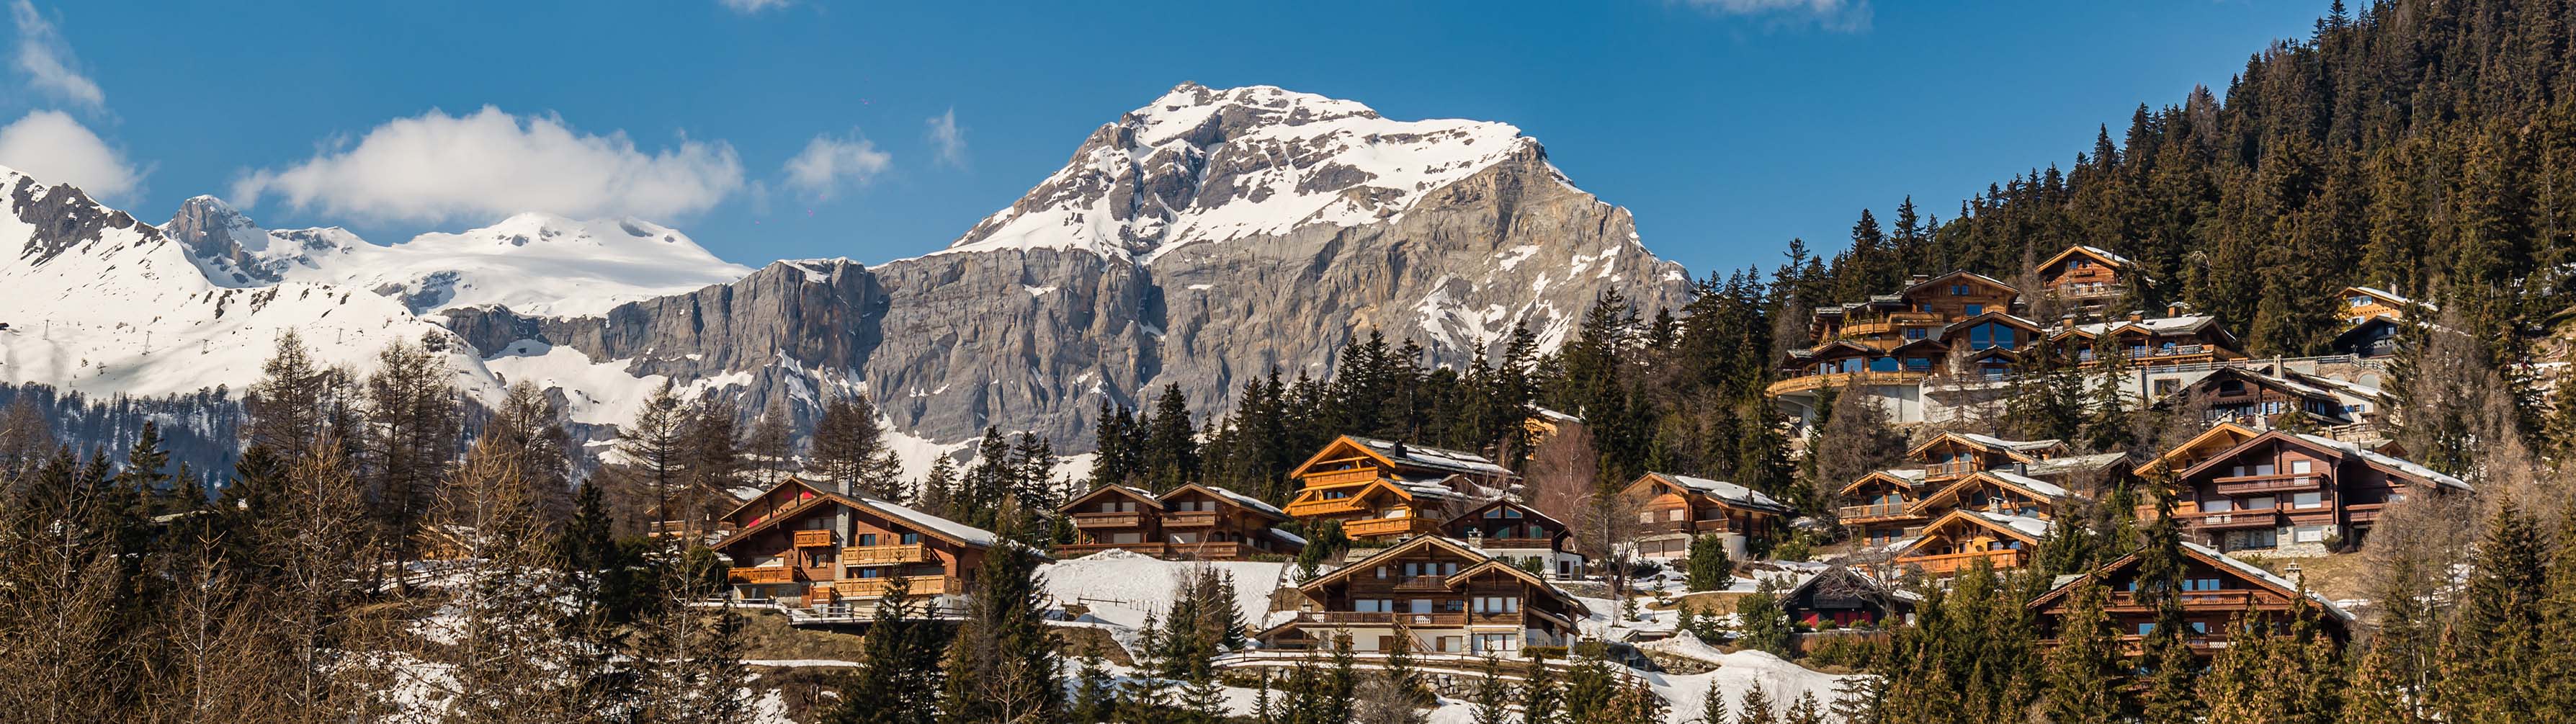 Chalets lie before the imposing mountain peak of Crans Montana.